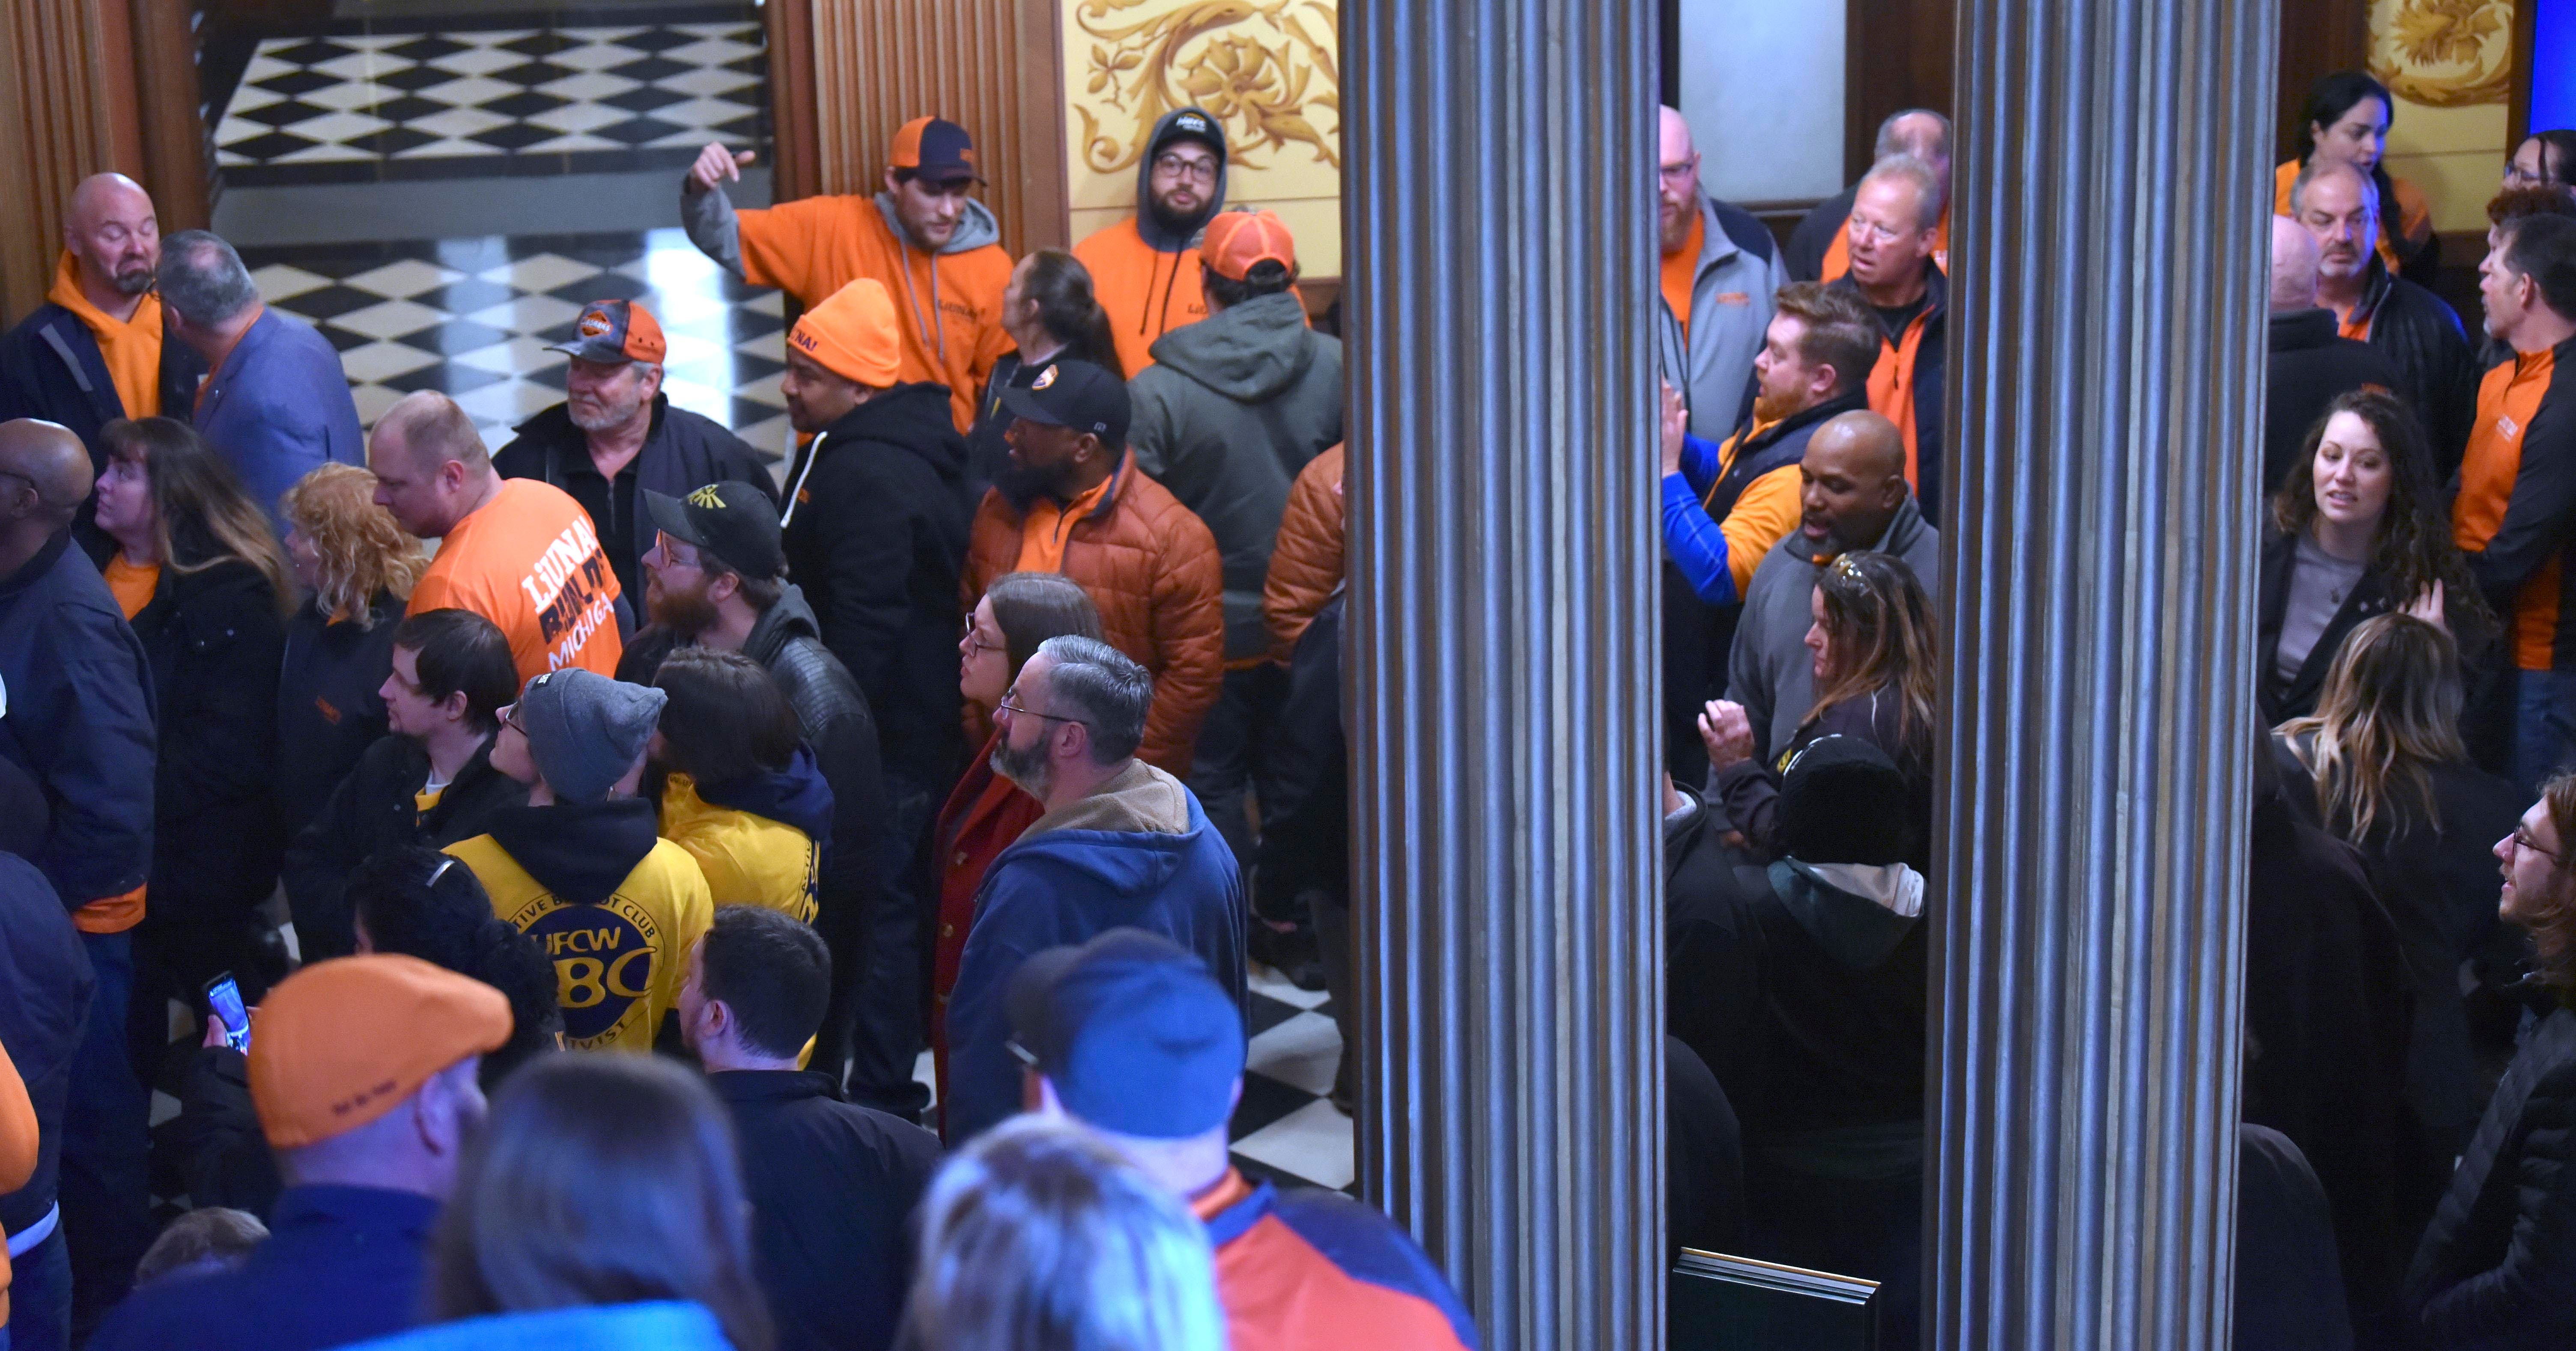 Union members, supporters and others wait for a Right To Work bill to be voted on as they wait outside Senate chambers and in the Capitol rotunda, Tuesday morning, March 14, 2023.